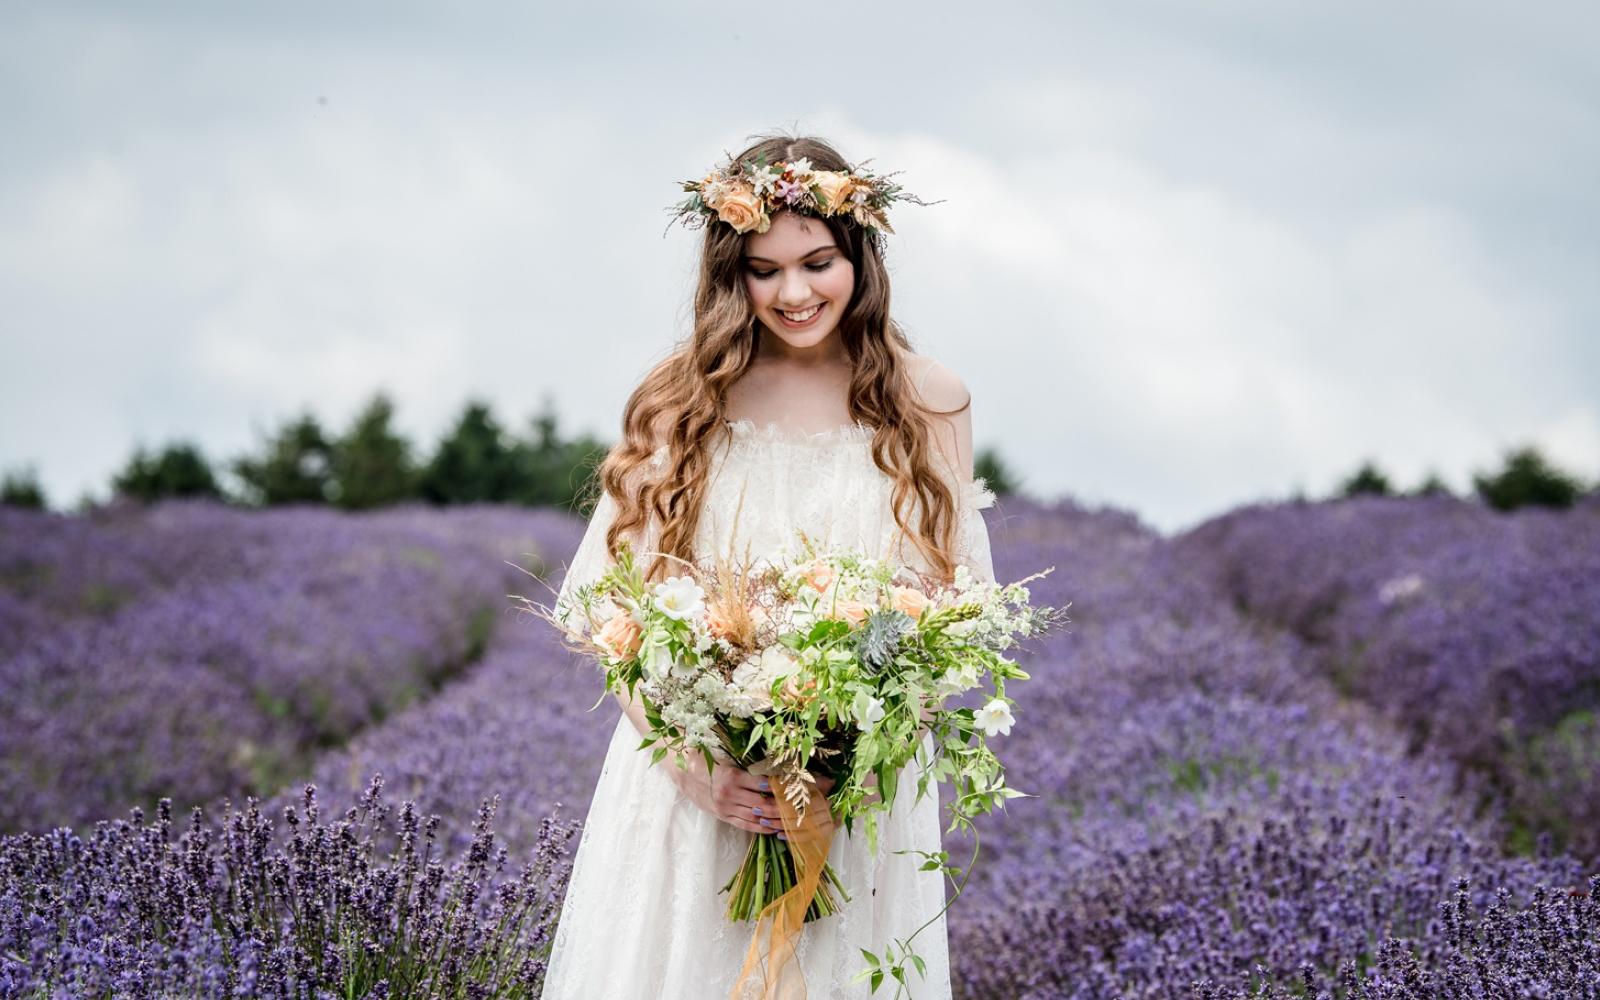 Styled Shoot ideas inspiration Capture Every Moment Make Up by Carissa Wendy House Flowers Willoughby Wolf lavender fields Snowshill Becky Pinker boho long curls